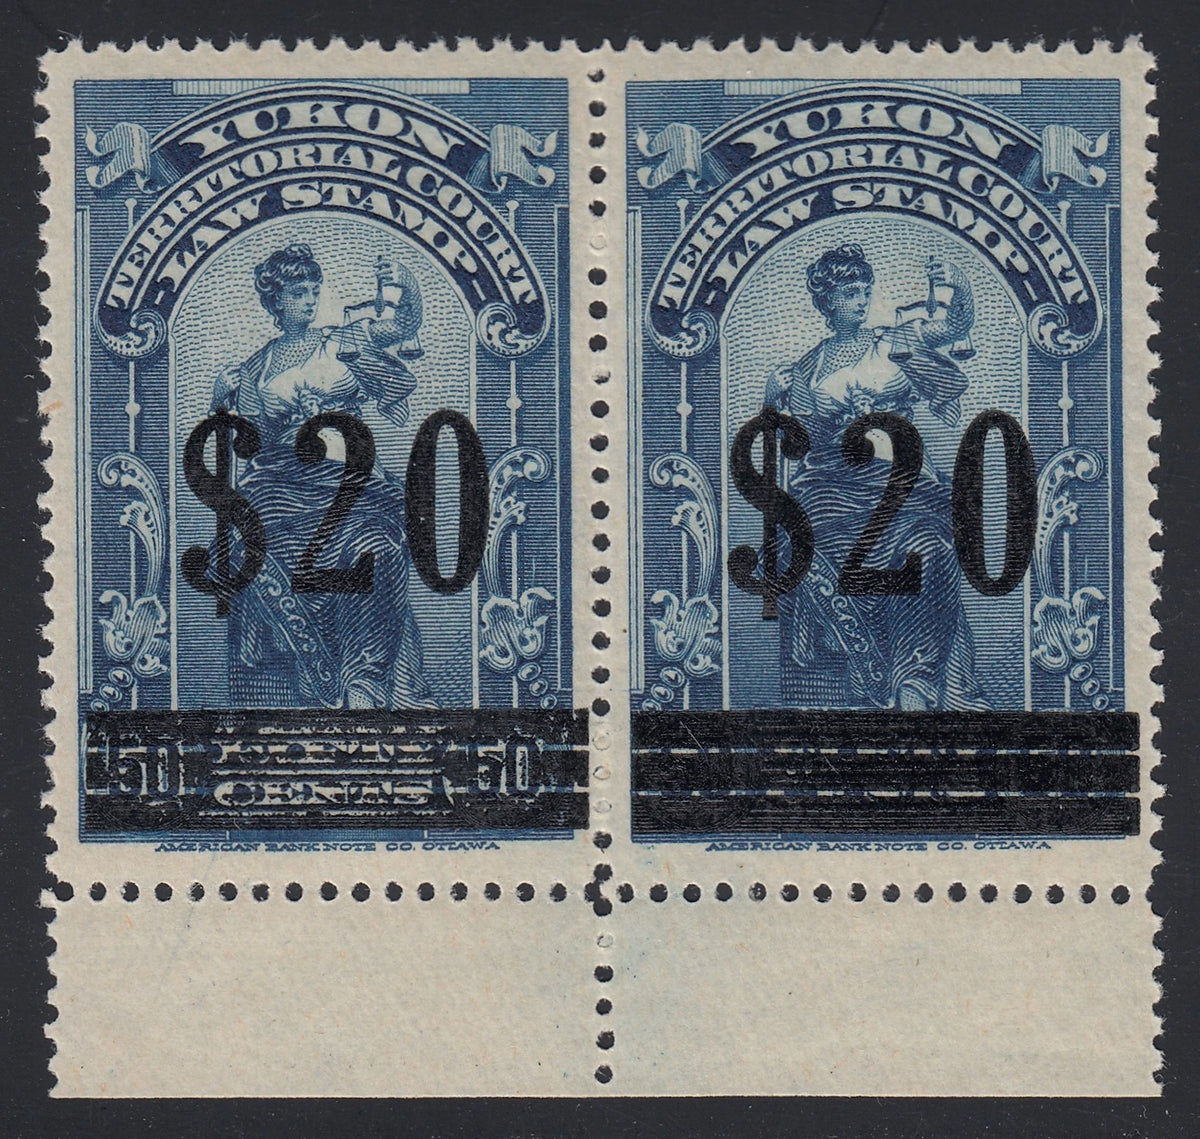 0019YL2102 - YL19 - Mint Pair, Rare &amp; Unlisted